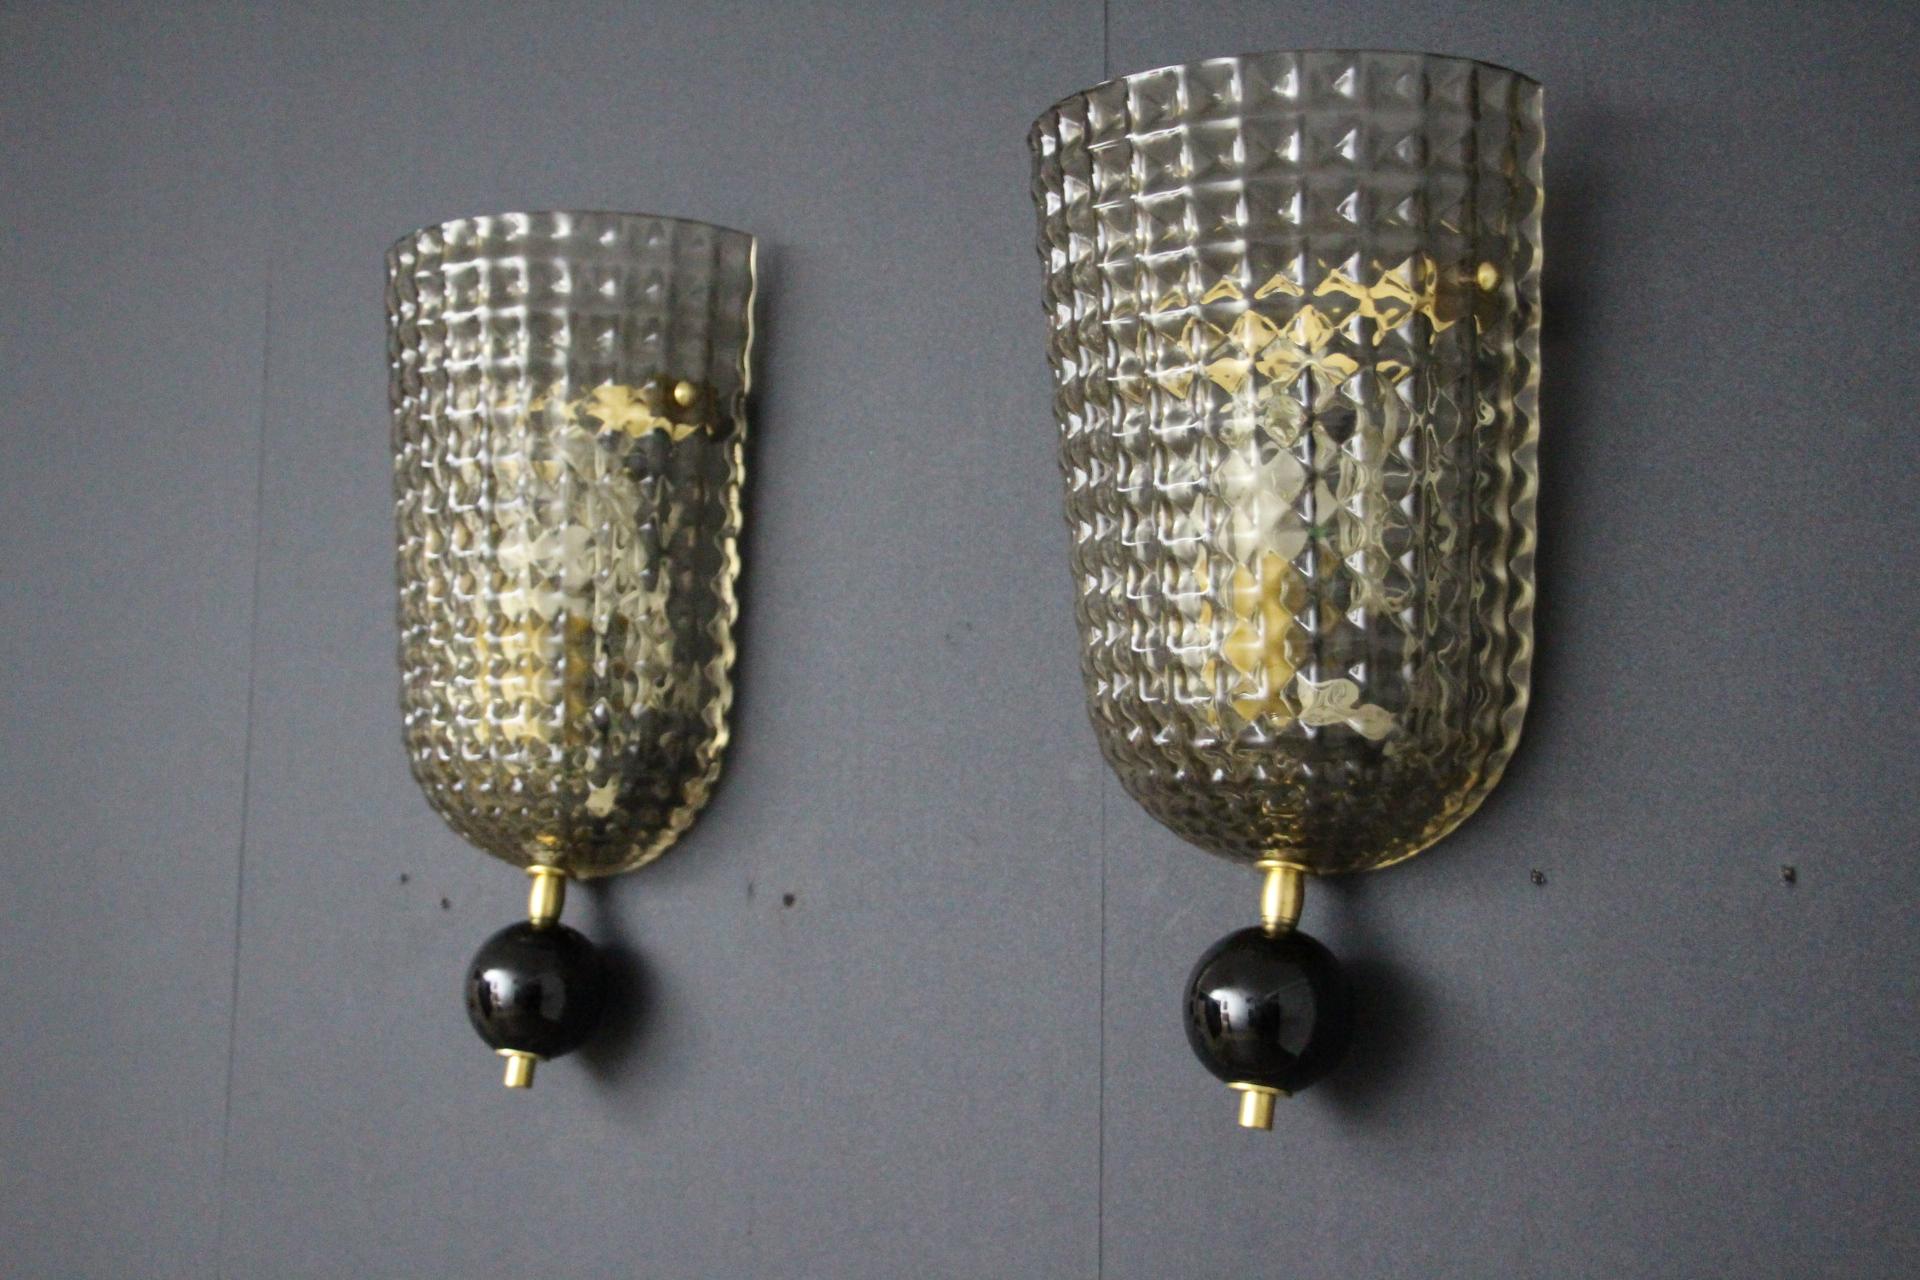 This pair of wall lights was made in Murano. They feature diamond cut in smoked textured Murano glass , looking like a checkers pattern in glass . It is ending with black Murano glass globe finials.Their brass fittings add a touch of preciousness to